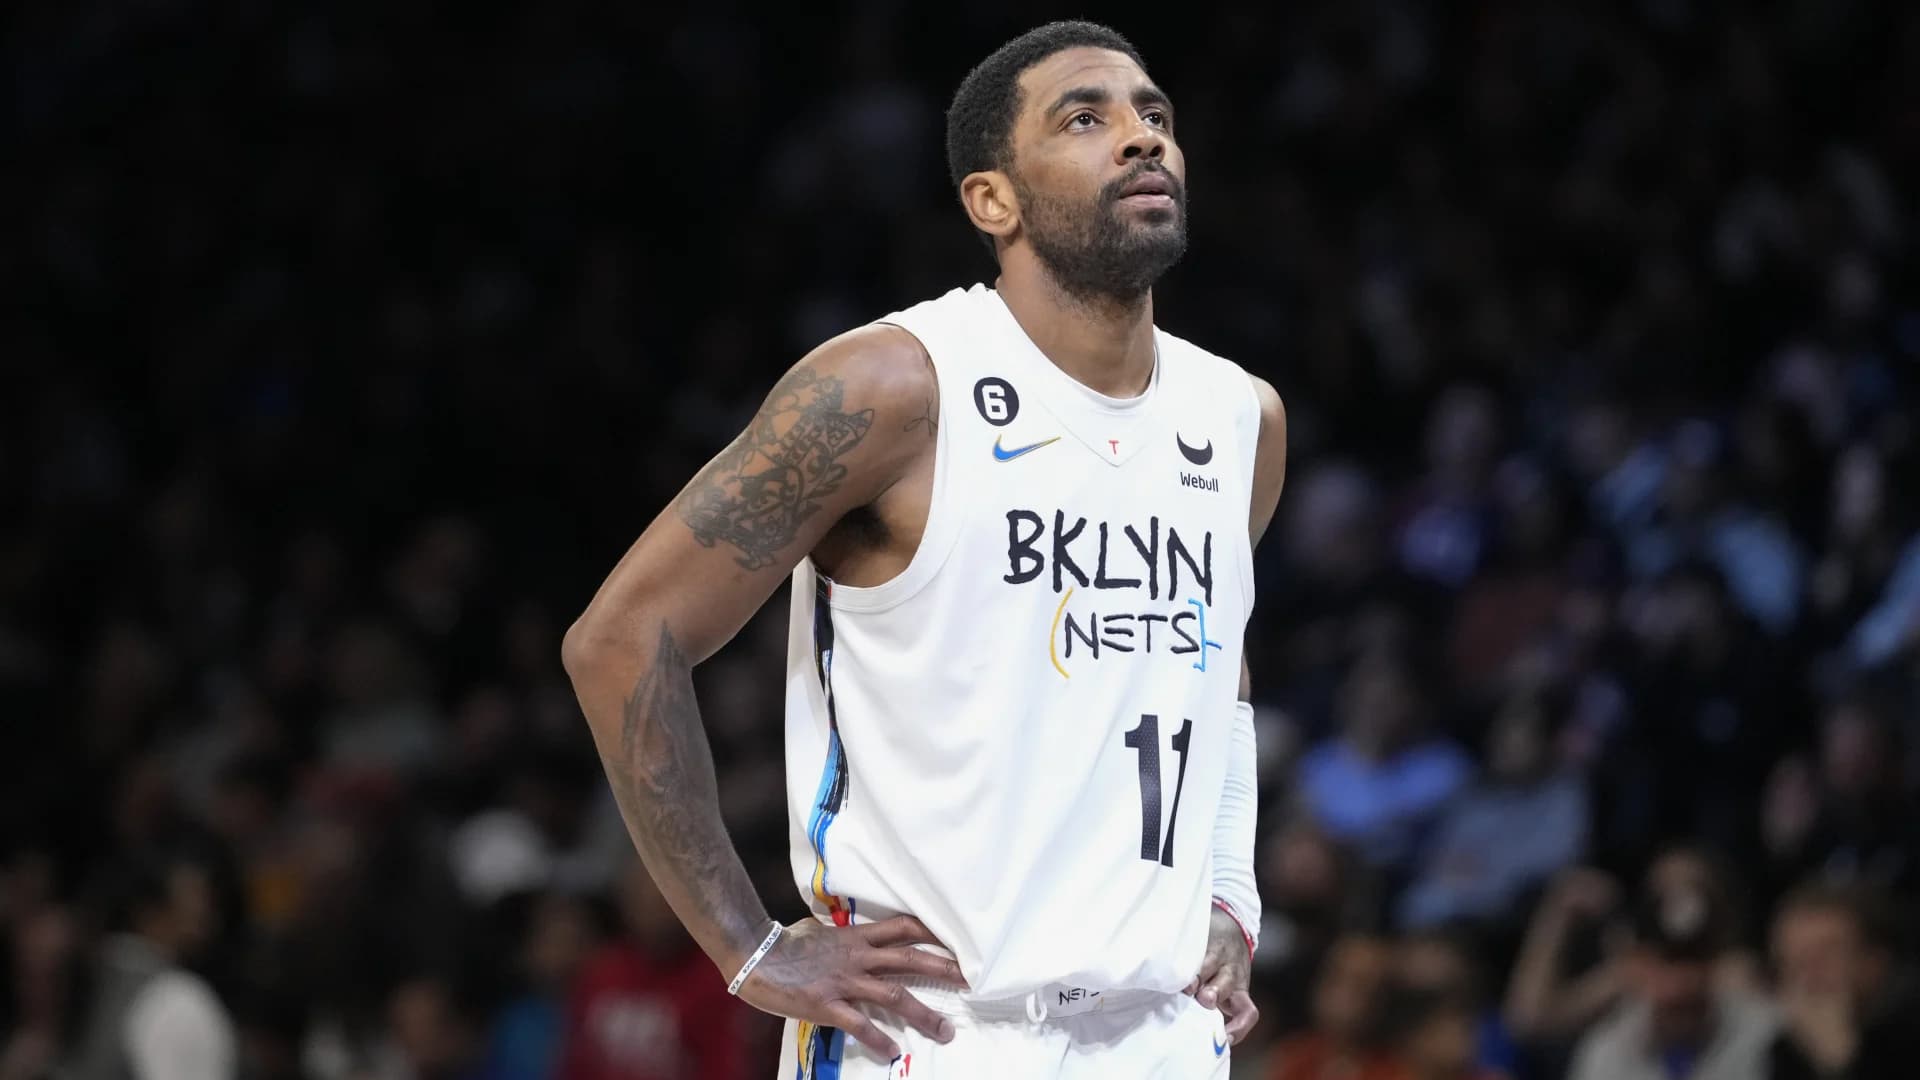 Nets’ Kyrie Irving requests trade, according to reports